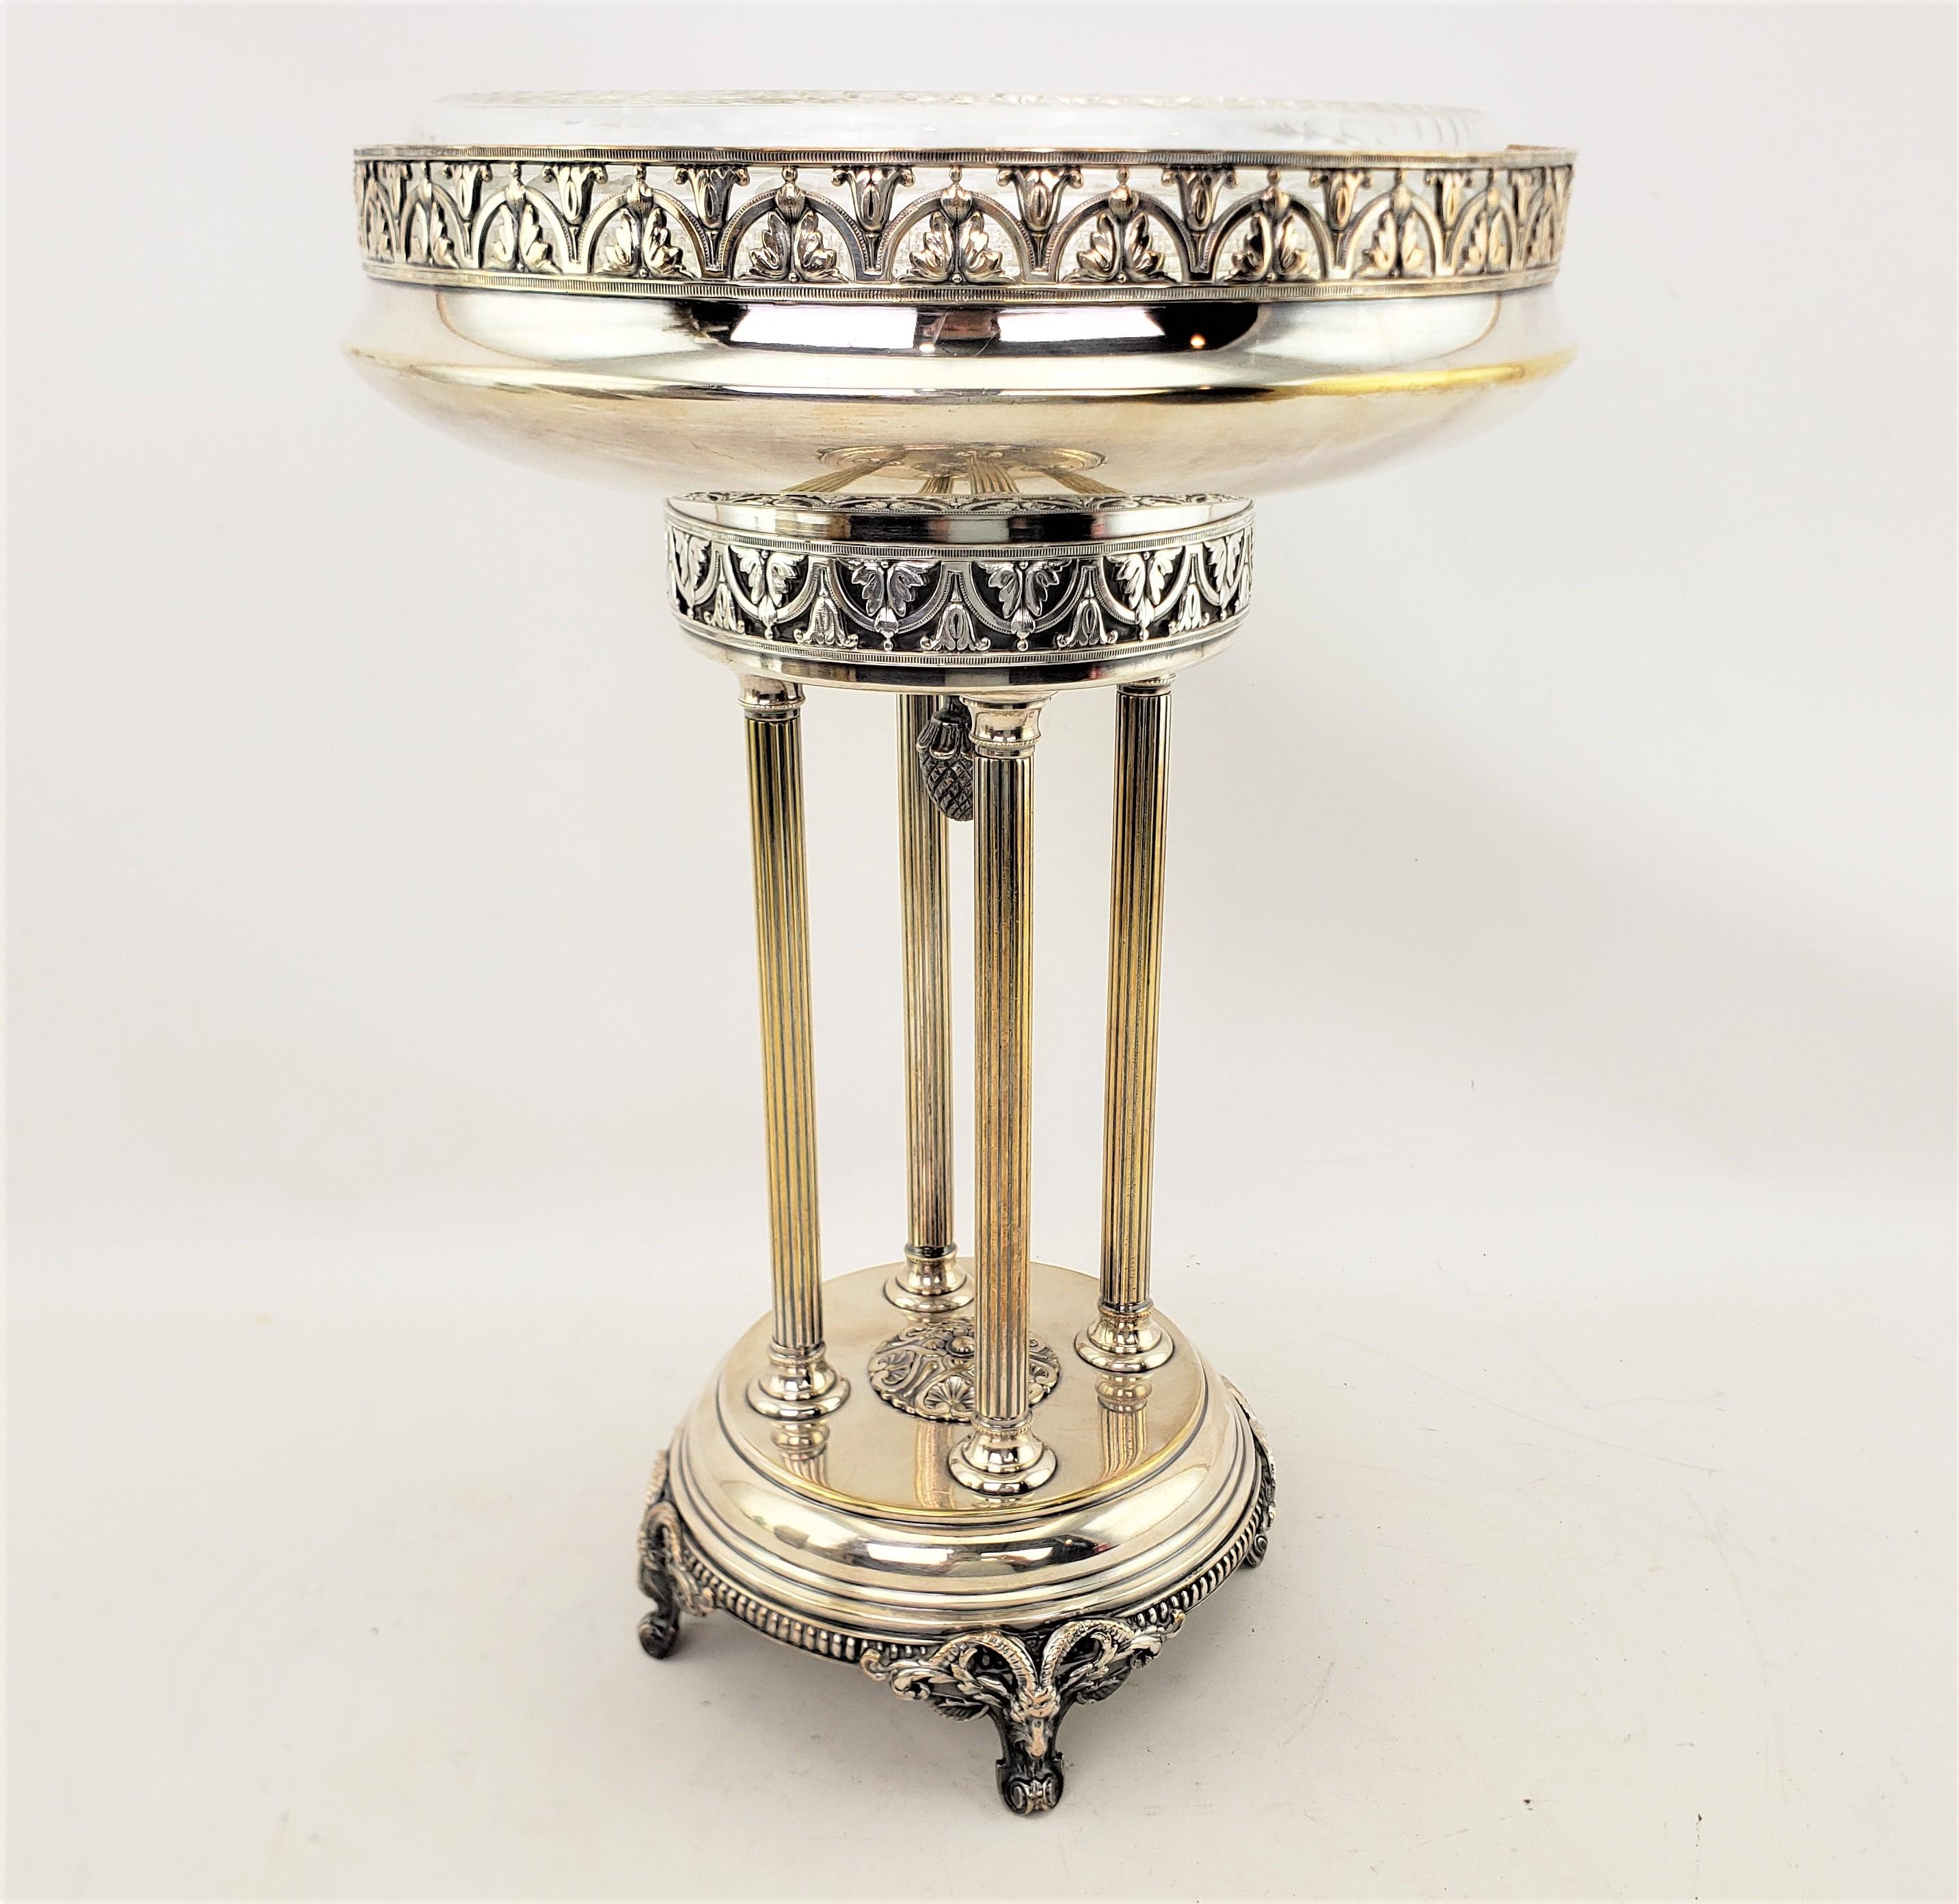 20th Century Antique Silver Plated Centerpiece in the Neoclassical Revival Style For Sale